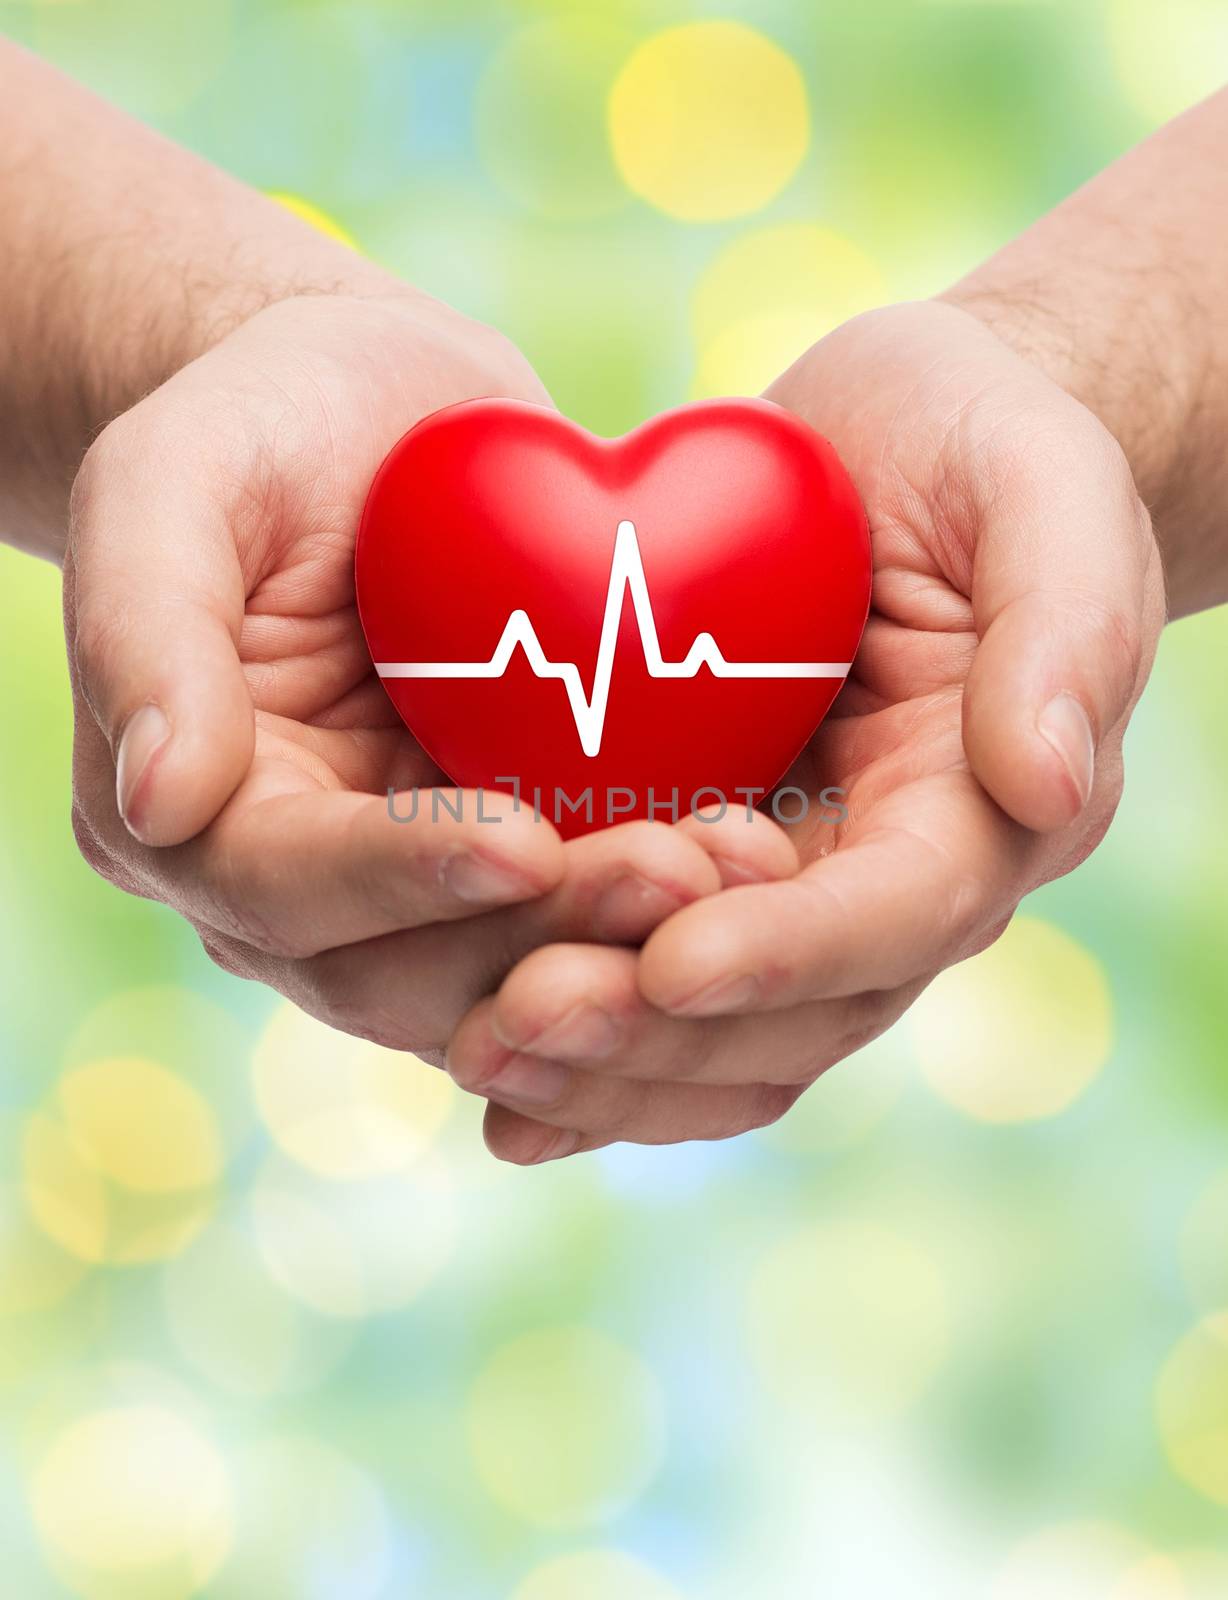 family health, charity and medicine concept - close up of hands holding red heart with cardiogram over green lights background